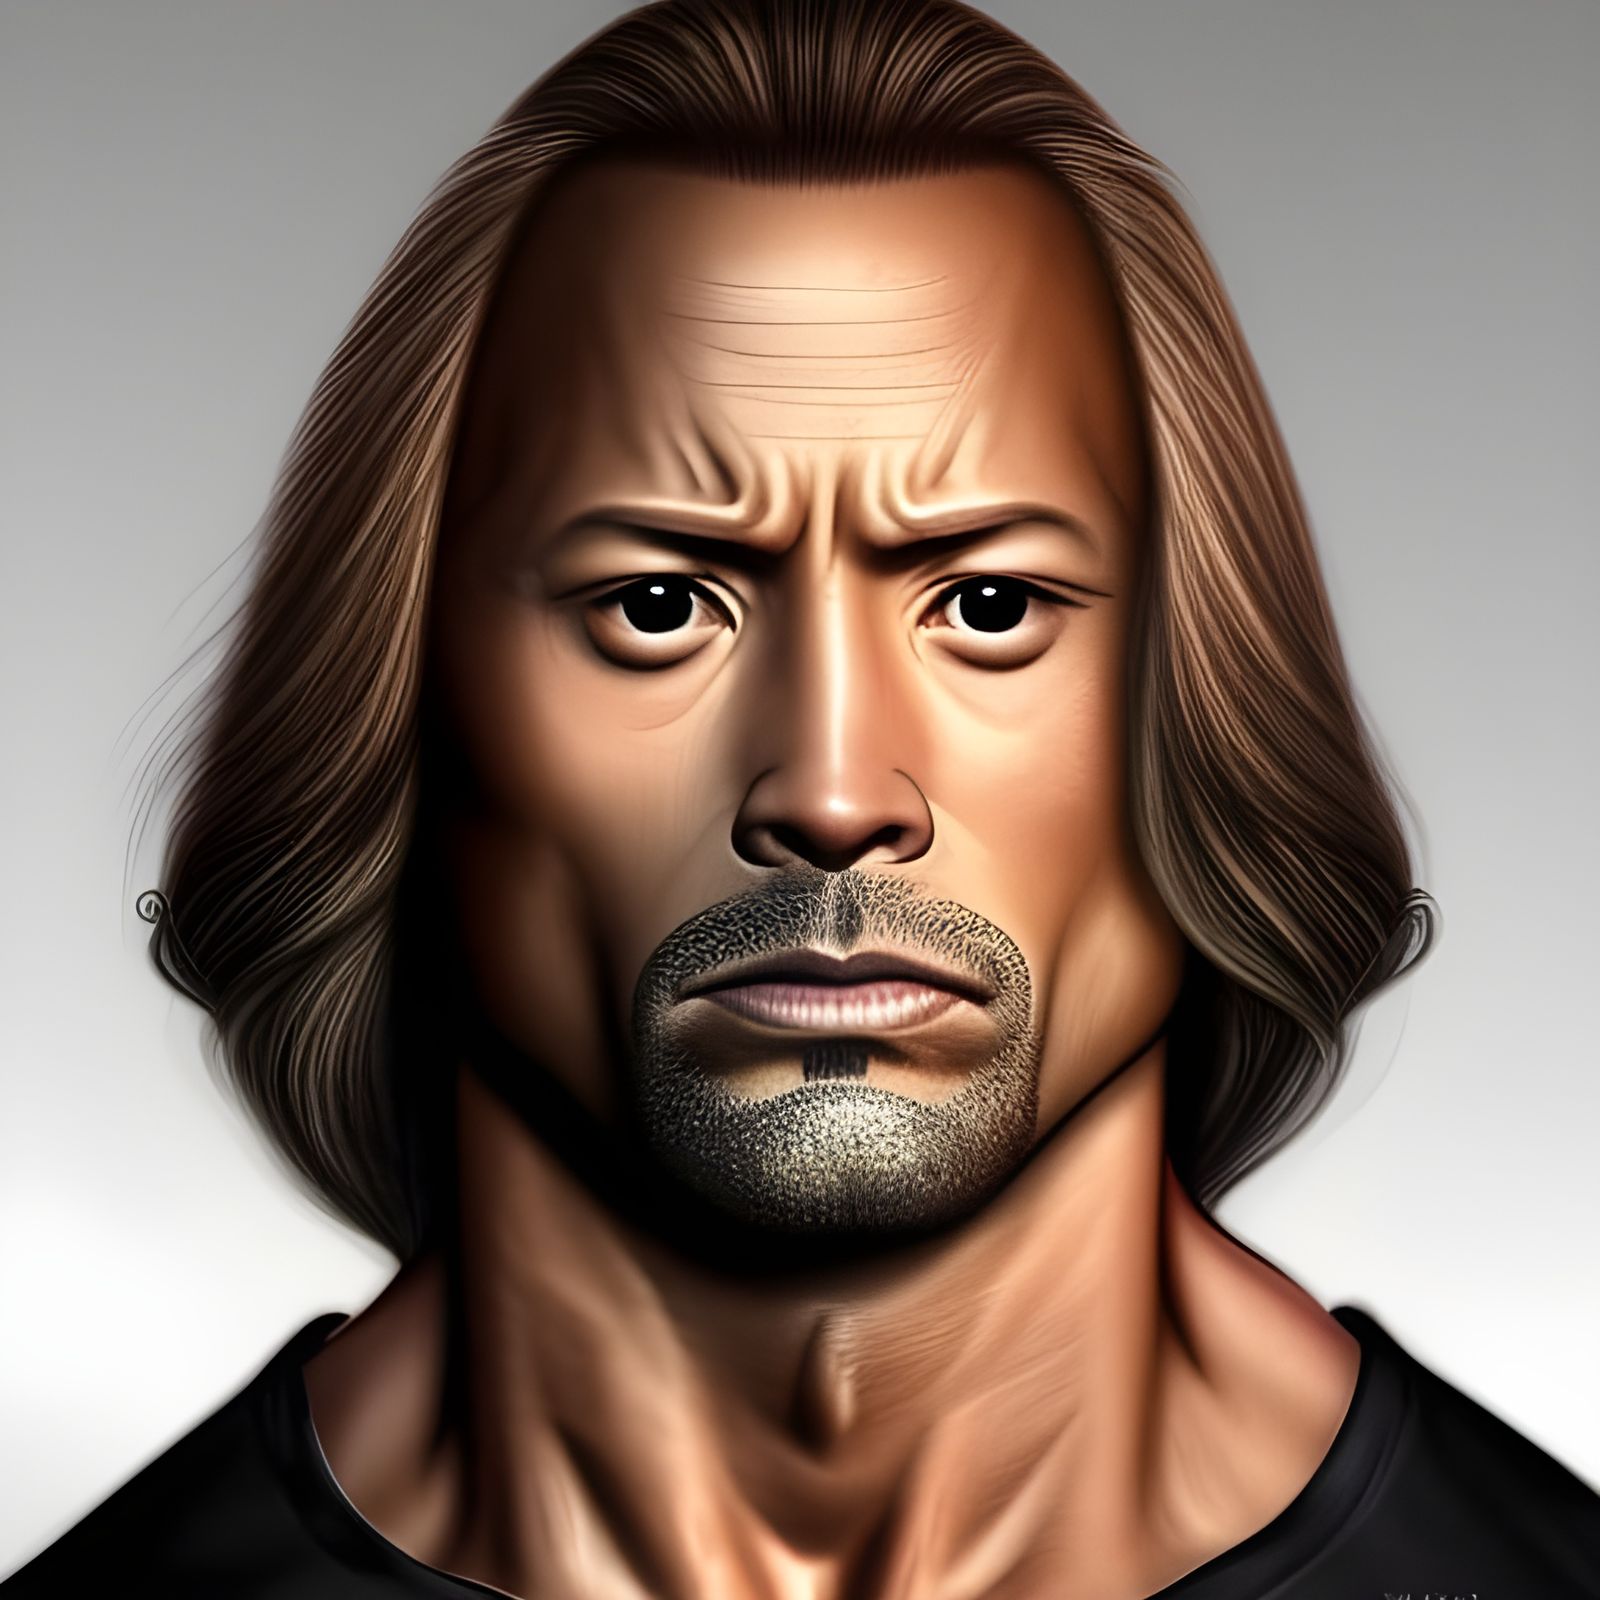 Dwayne Johnson doing his eyebrow face towards the, Stable Diffusion